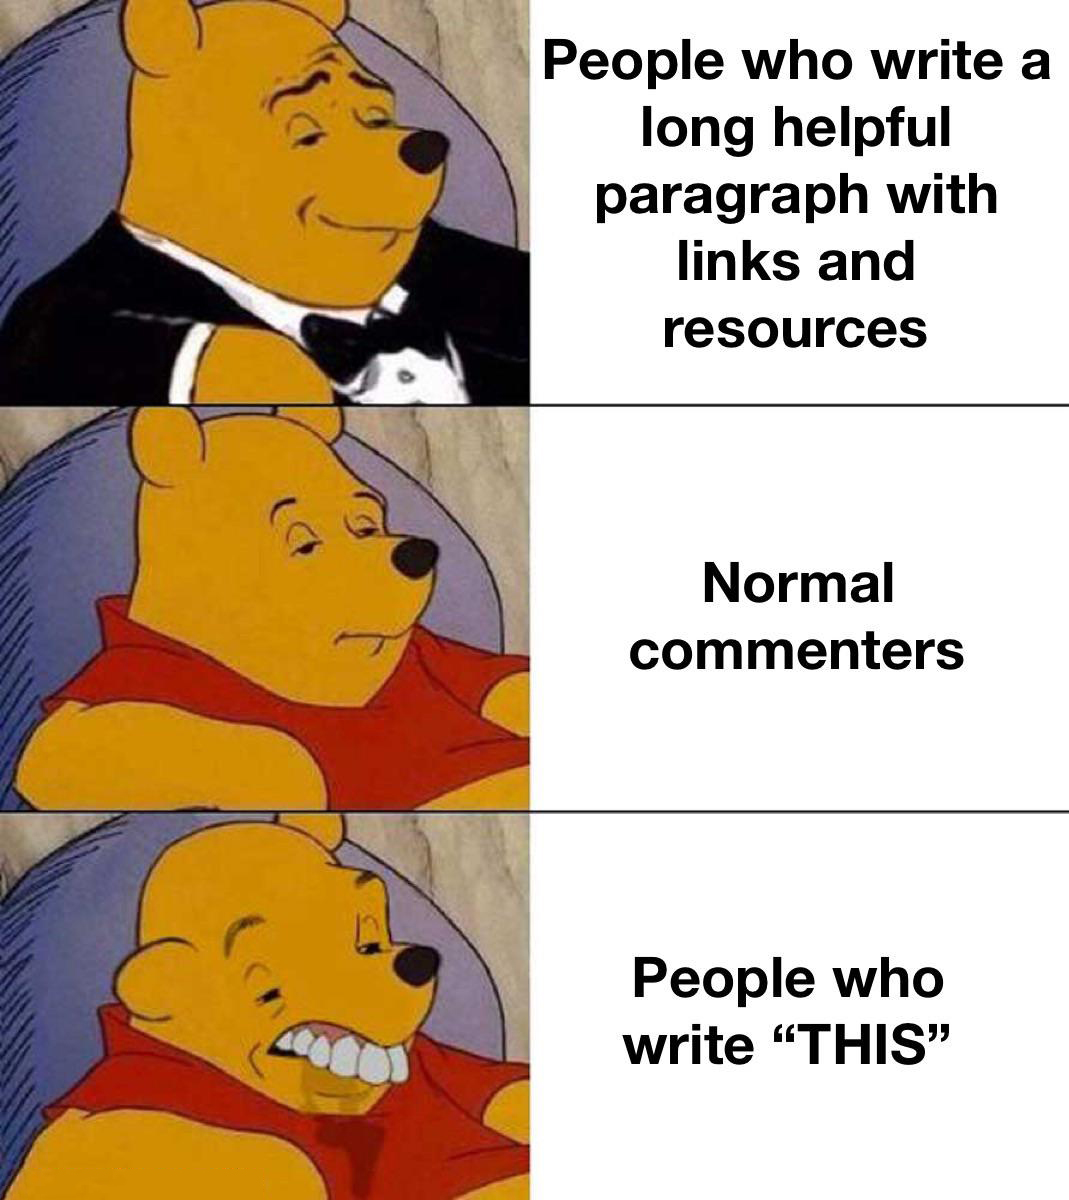 dank memes - soi boi - People who write a long helpful paragraph with links and resources Normal commenters People who write "This."